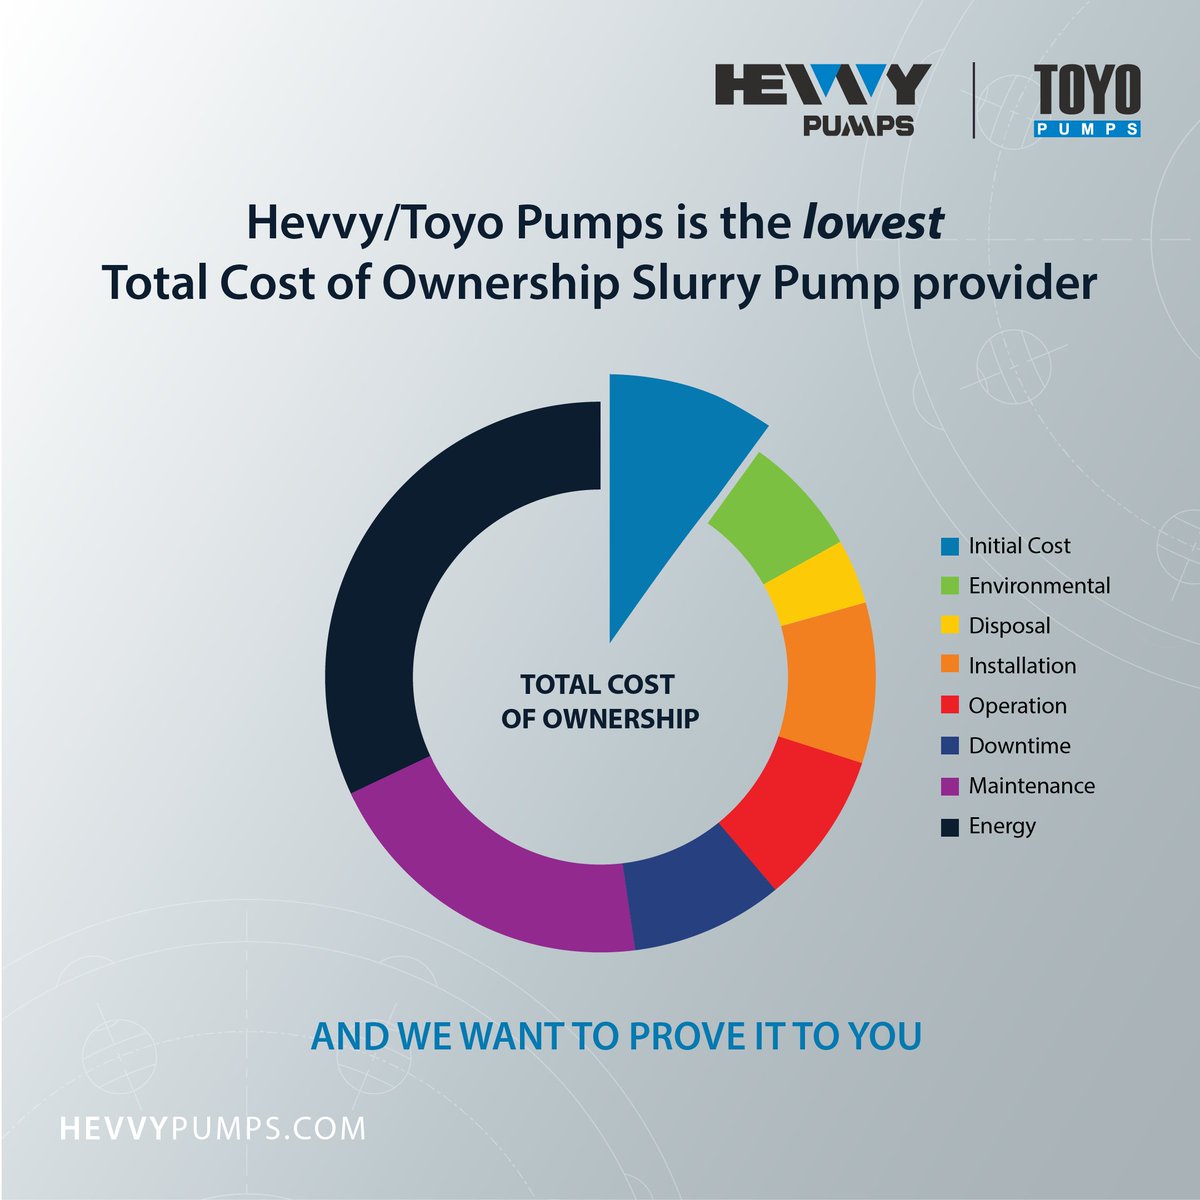 Slurry pump costs: Upfront equipment expense is only 10% of the TCO, and pump performance impacts 90%. We offer low maintenance, reduced downtime, and increased productivity, saving up to 50% over 3 years.  Discover more at //bit.ly/3Jn6fKL

#MaintenanceCosts #Productivity #pumps